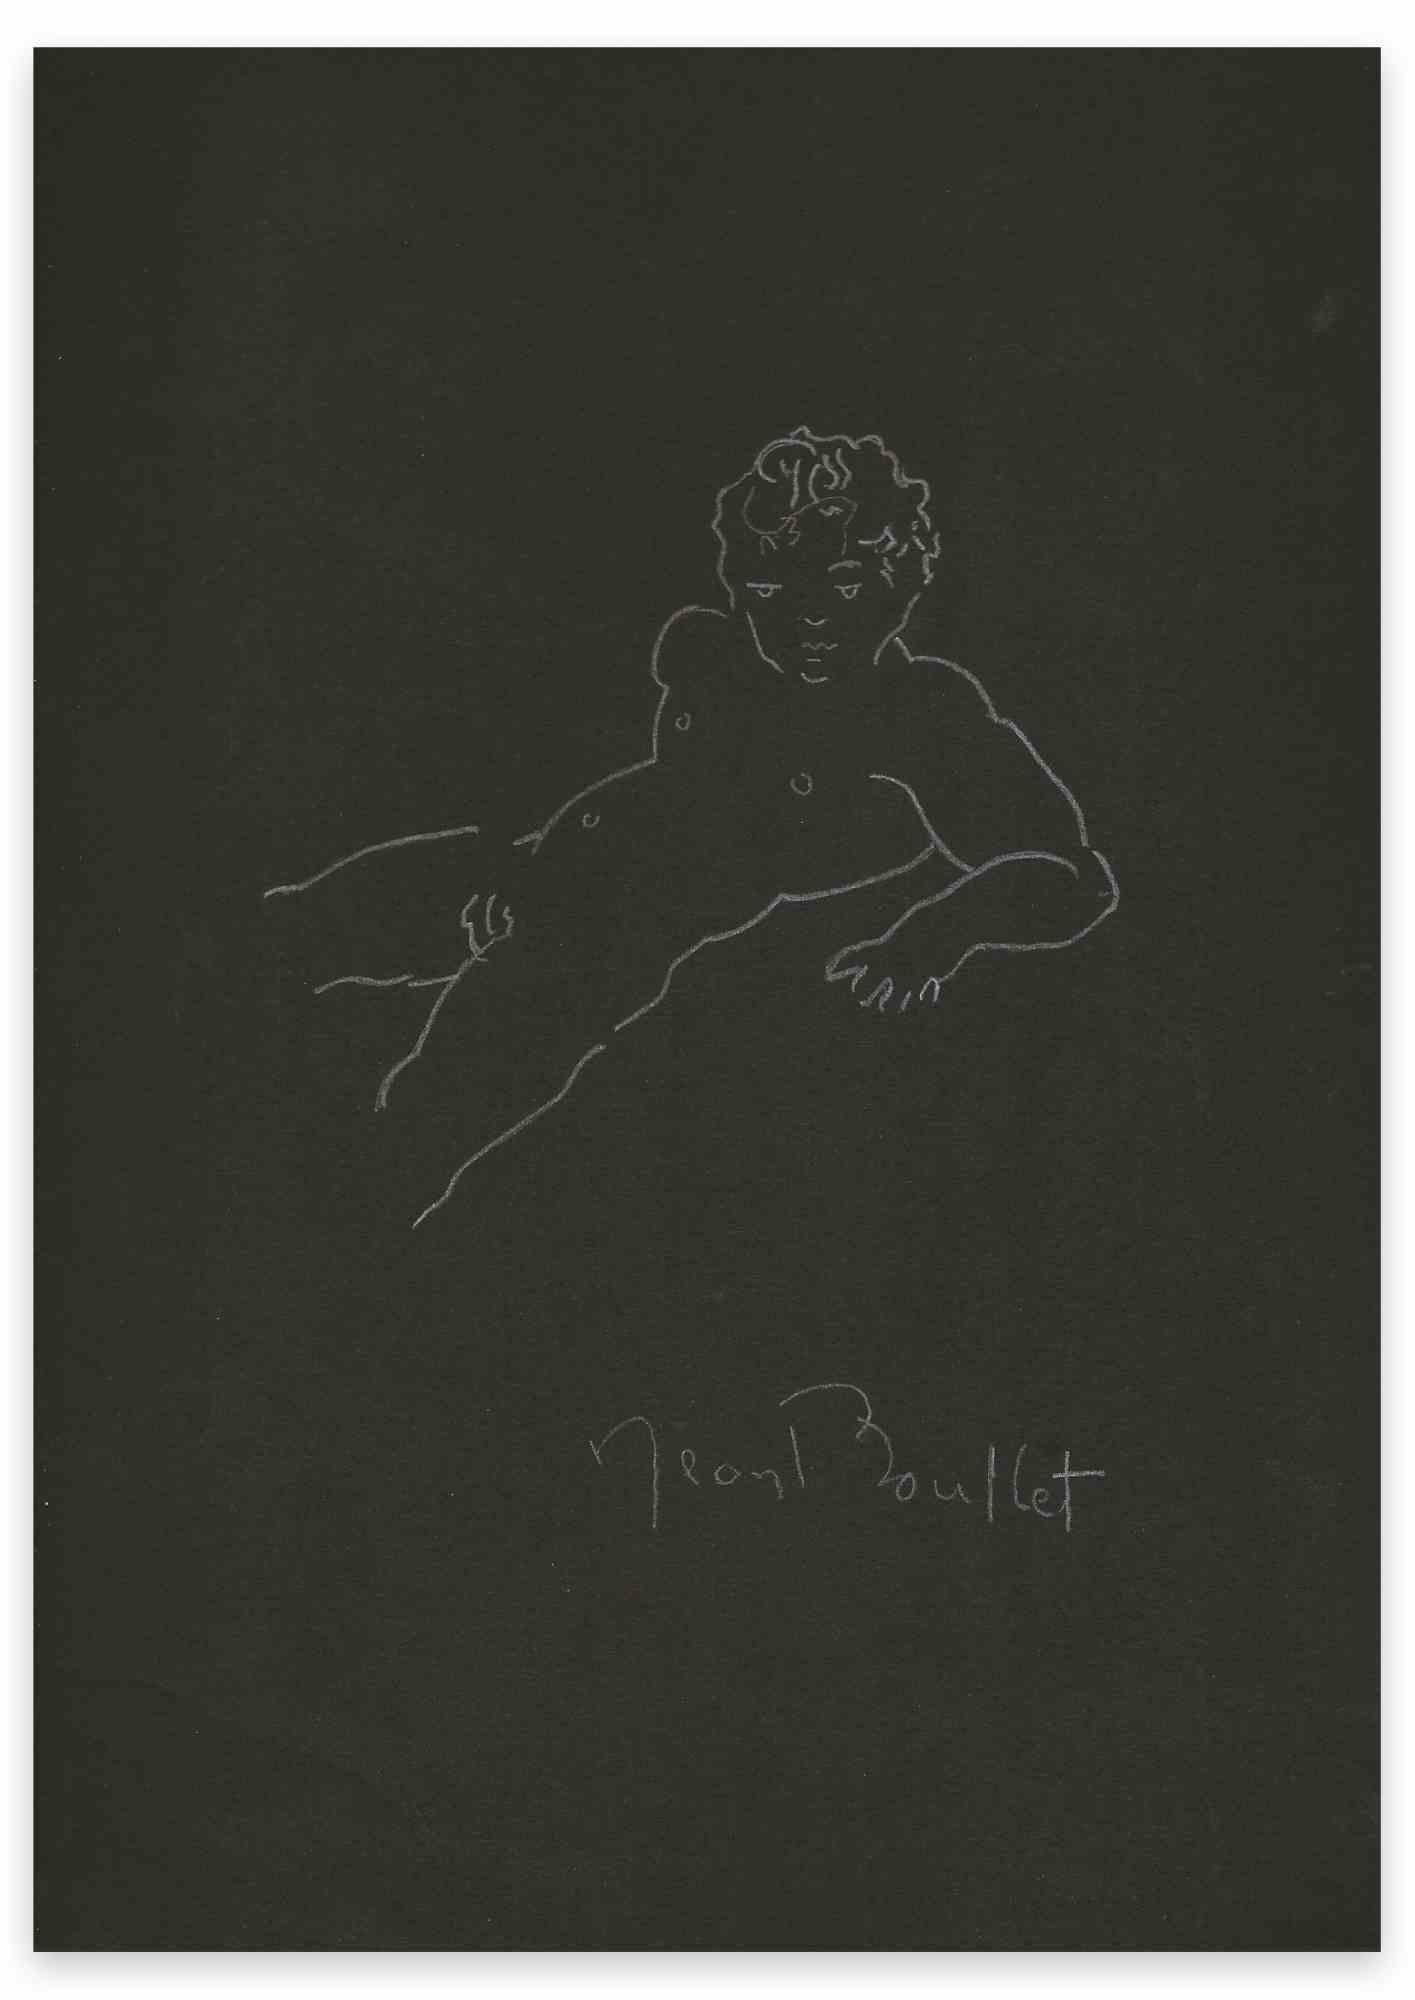 A small Cherub is an Original Pencil Drawing realized by Jean Boullet .

Hand signed on the right margin.

Good condition.

Jean Boullet (French, 1921-1970) 

Jean Boullet, born in 1921 in Paris and died in Algeria in December 1970, is a painter,